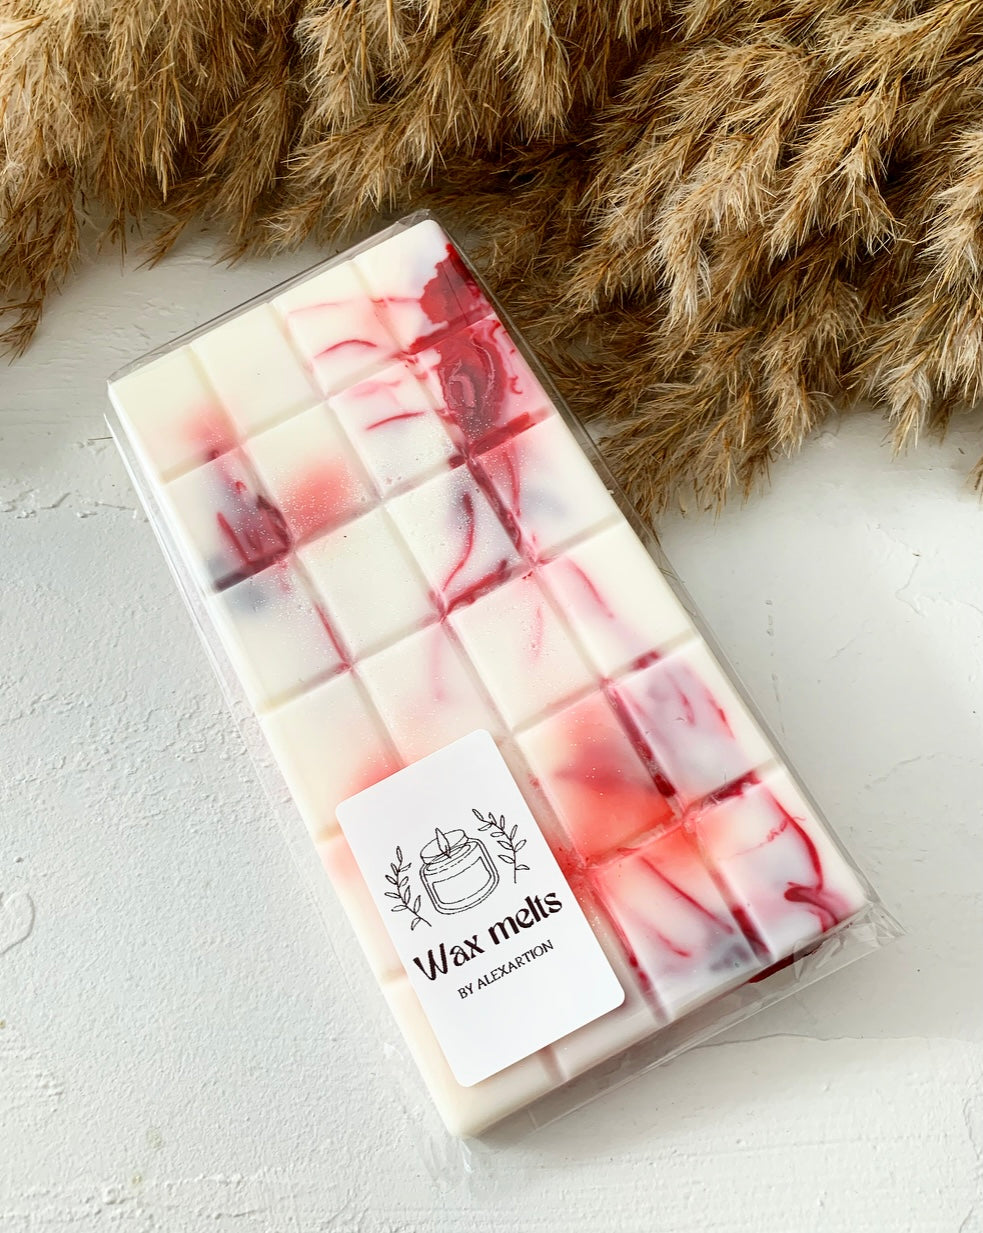 Scented soy wax bars